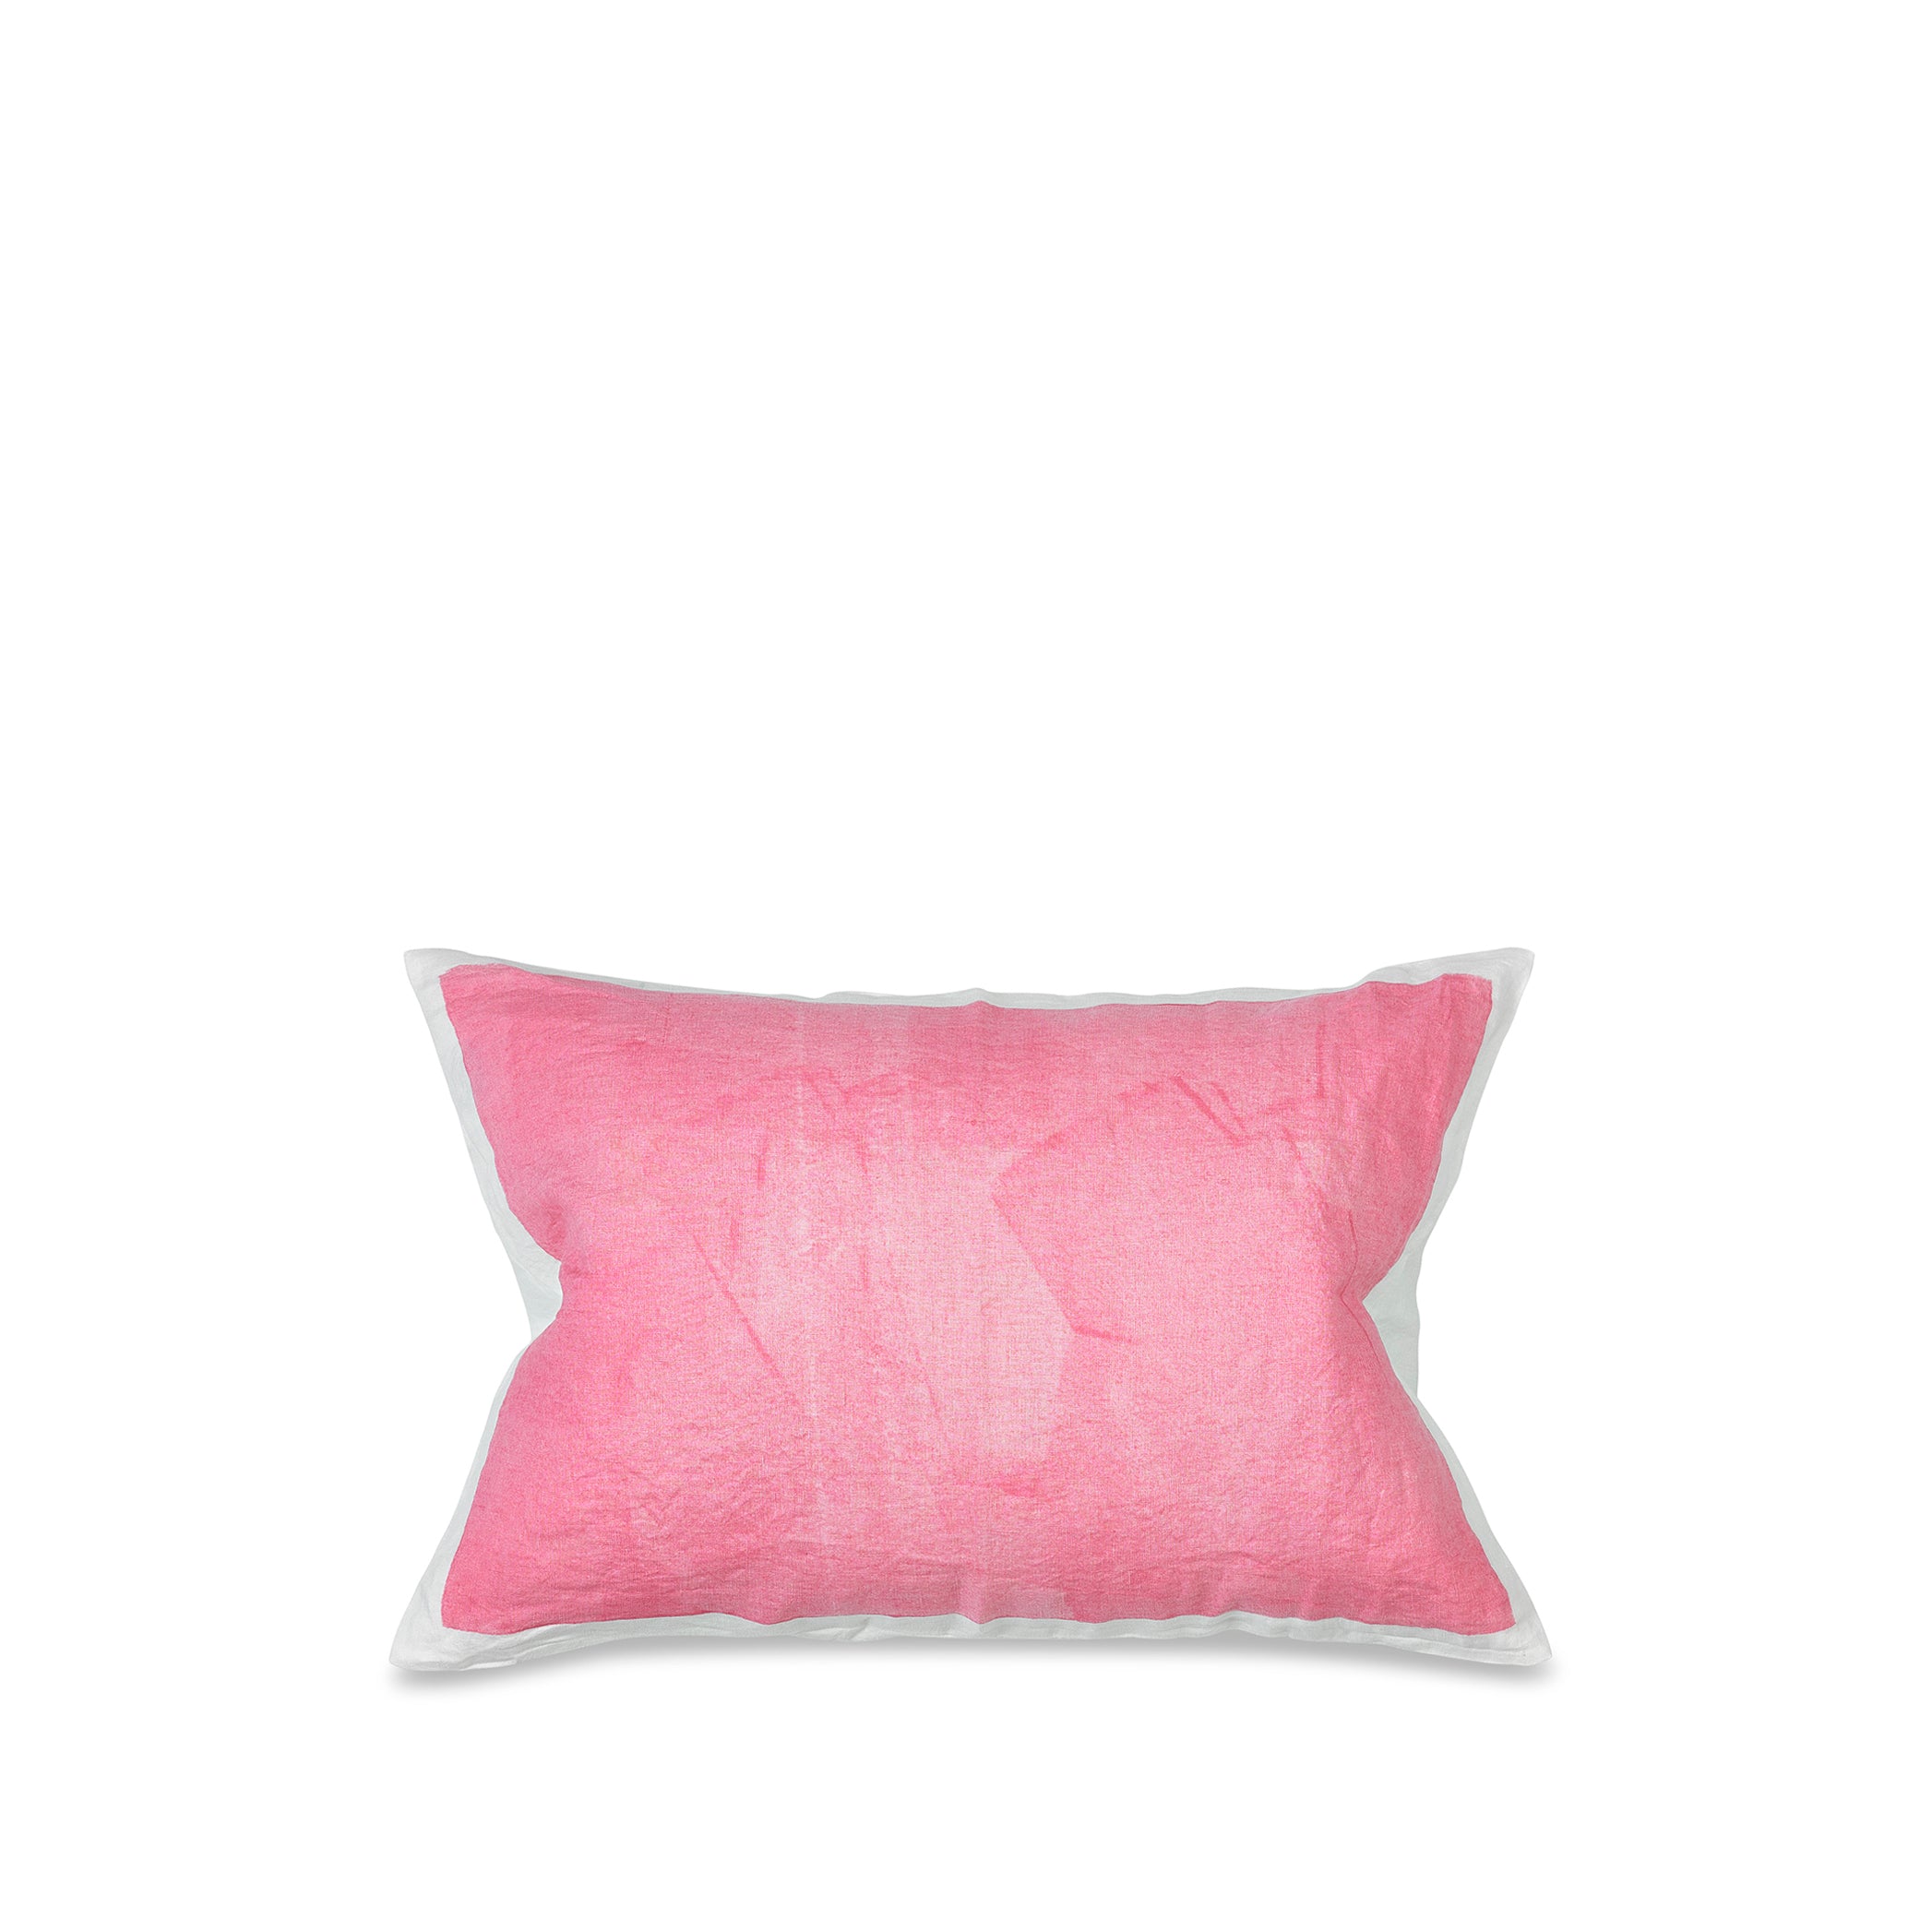 Hand Painted Linen Cushion in Rose Pink, 60cm x 40cm